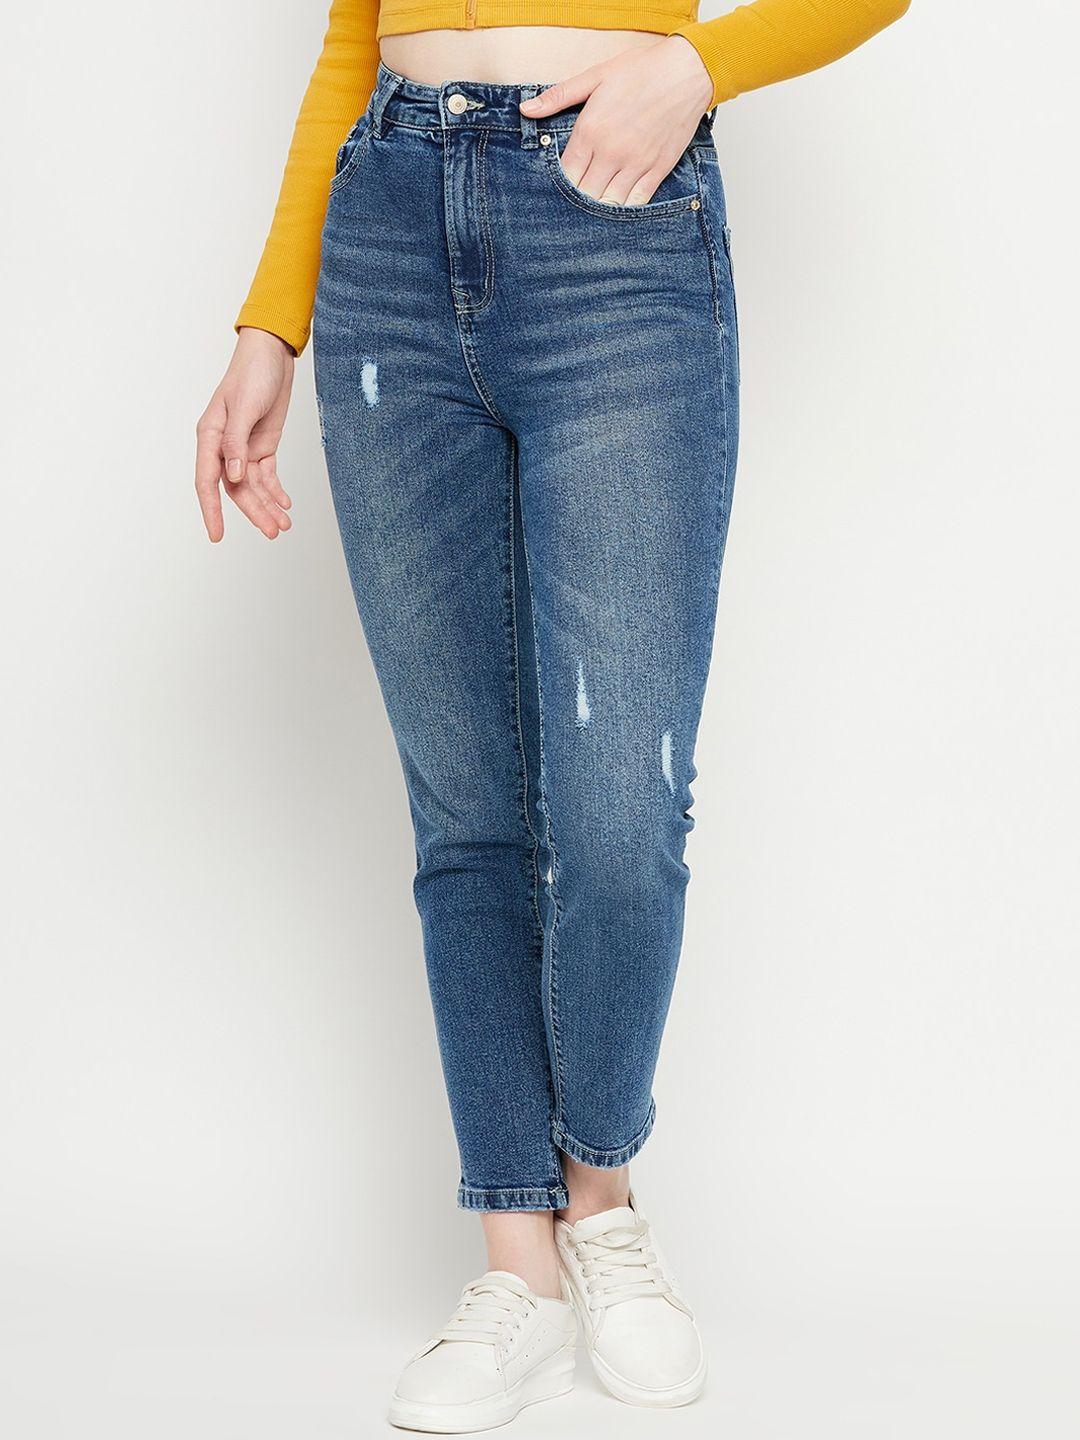 madame women mildly distressed heavy fade whiskers cotton jeans